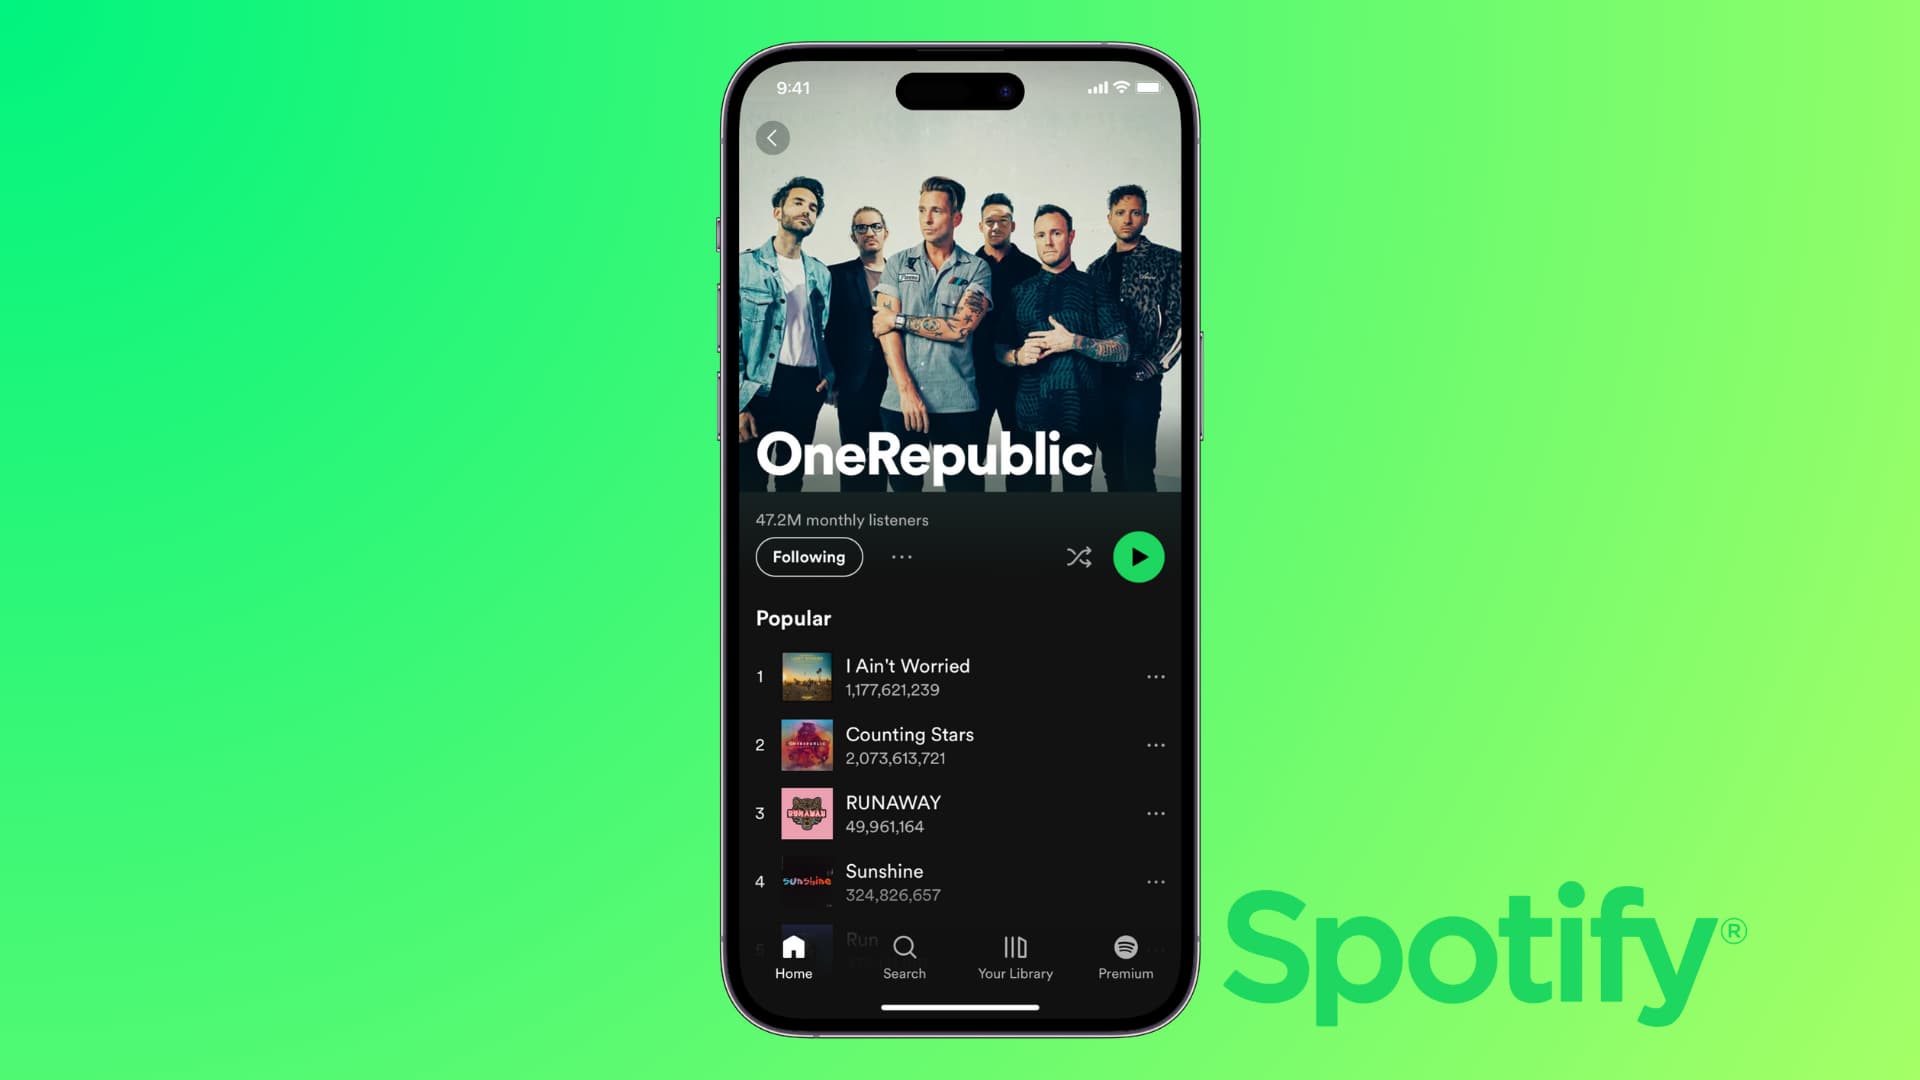 One Republic artist page in Spotify app on iPhone